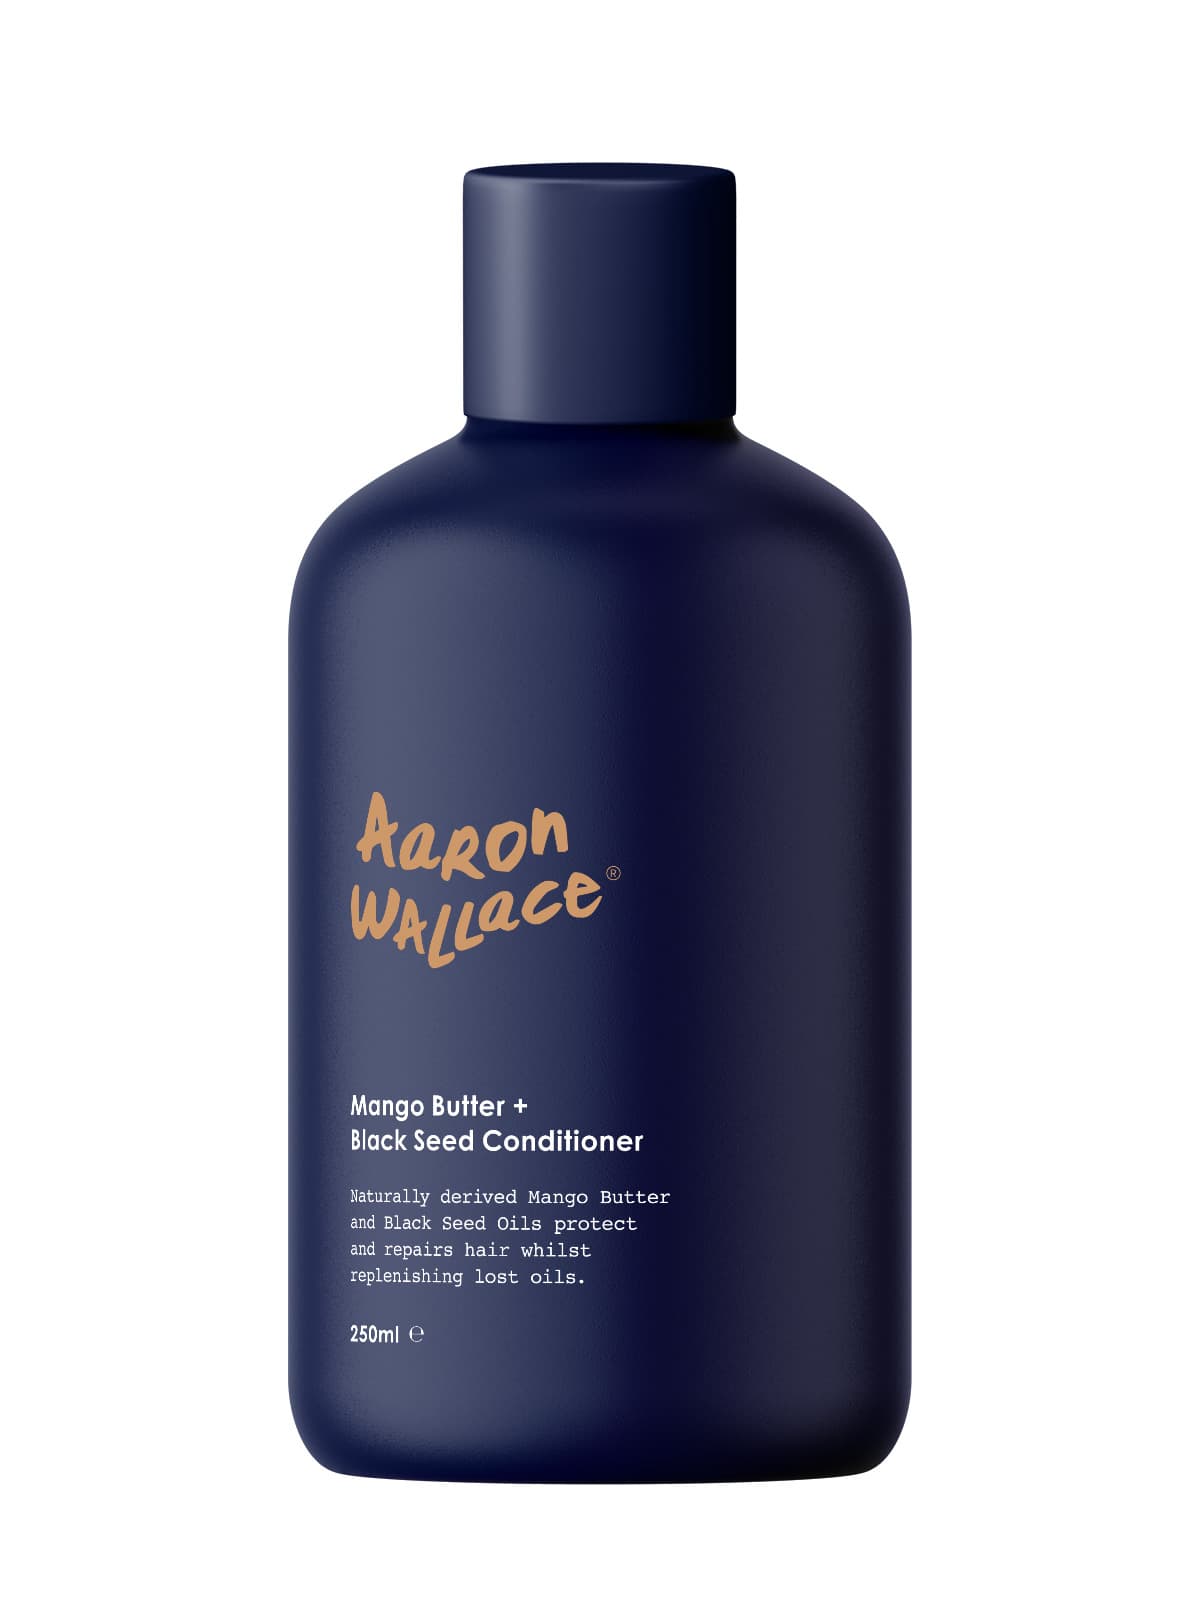 Aaron Wallace Mango Butter + Black Seed Conditioner is a beard conditioner for curly hair men to help with beard growth. Part of the Aaron Wallace 3-Step Haircare System beard growth kit and should be followed up with a Aaron Wallace beard growth oil to seal and protect from beard split ends. By Aaron Wallace and can be used as both a hair and beard conditioner